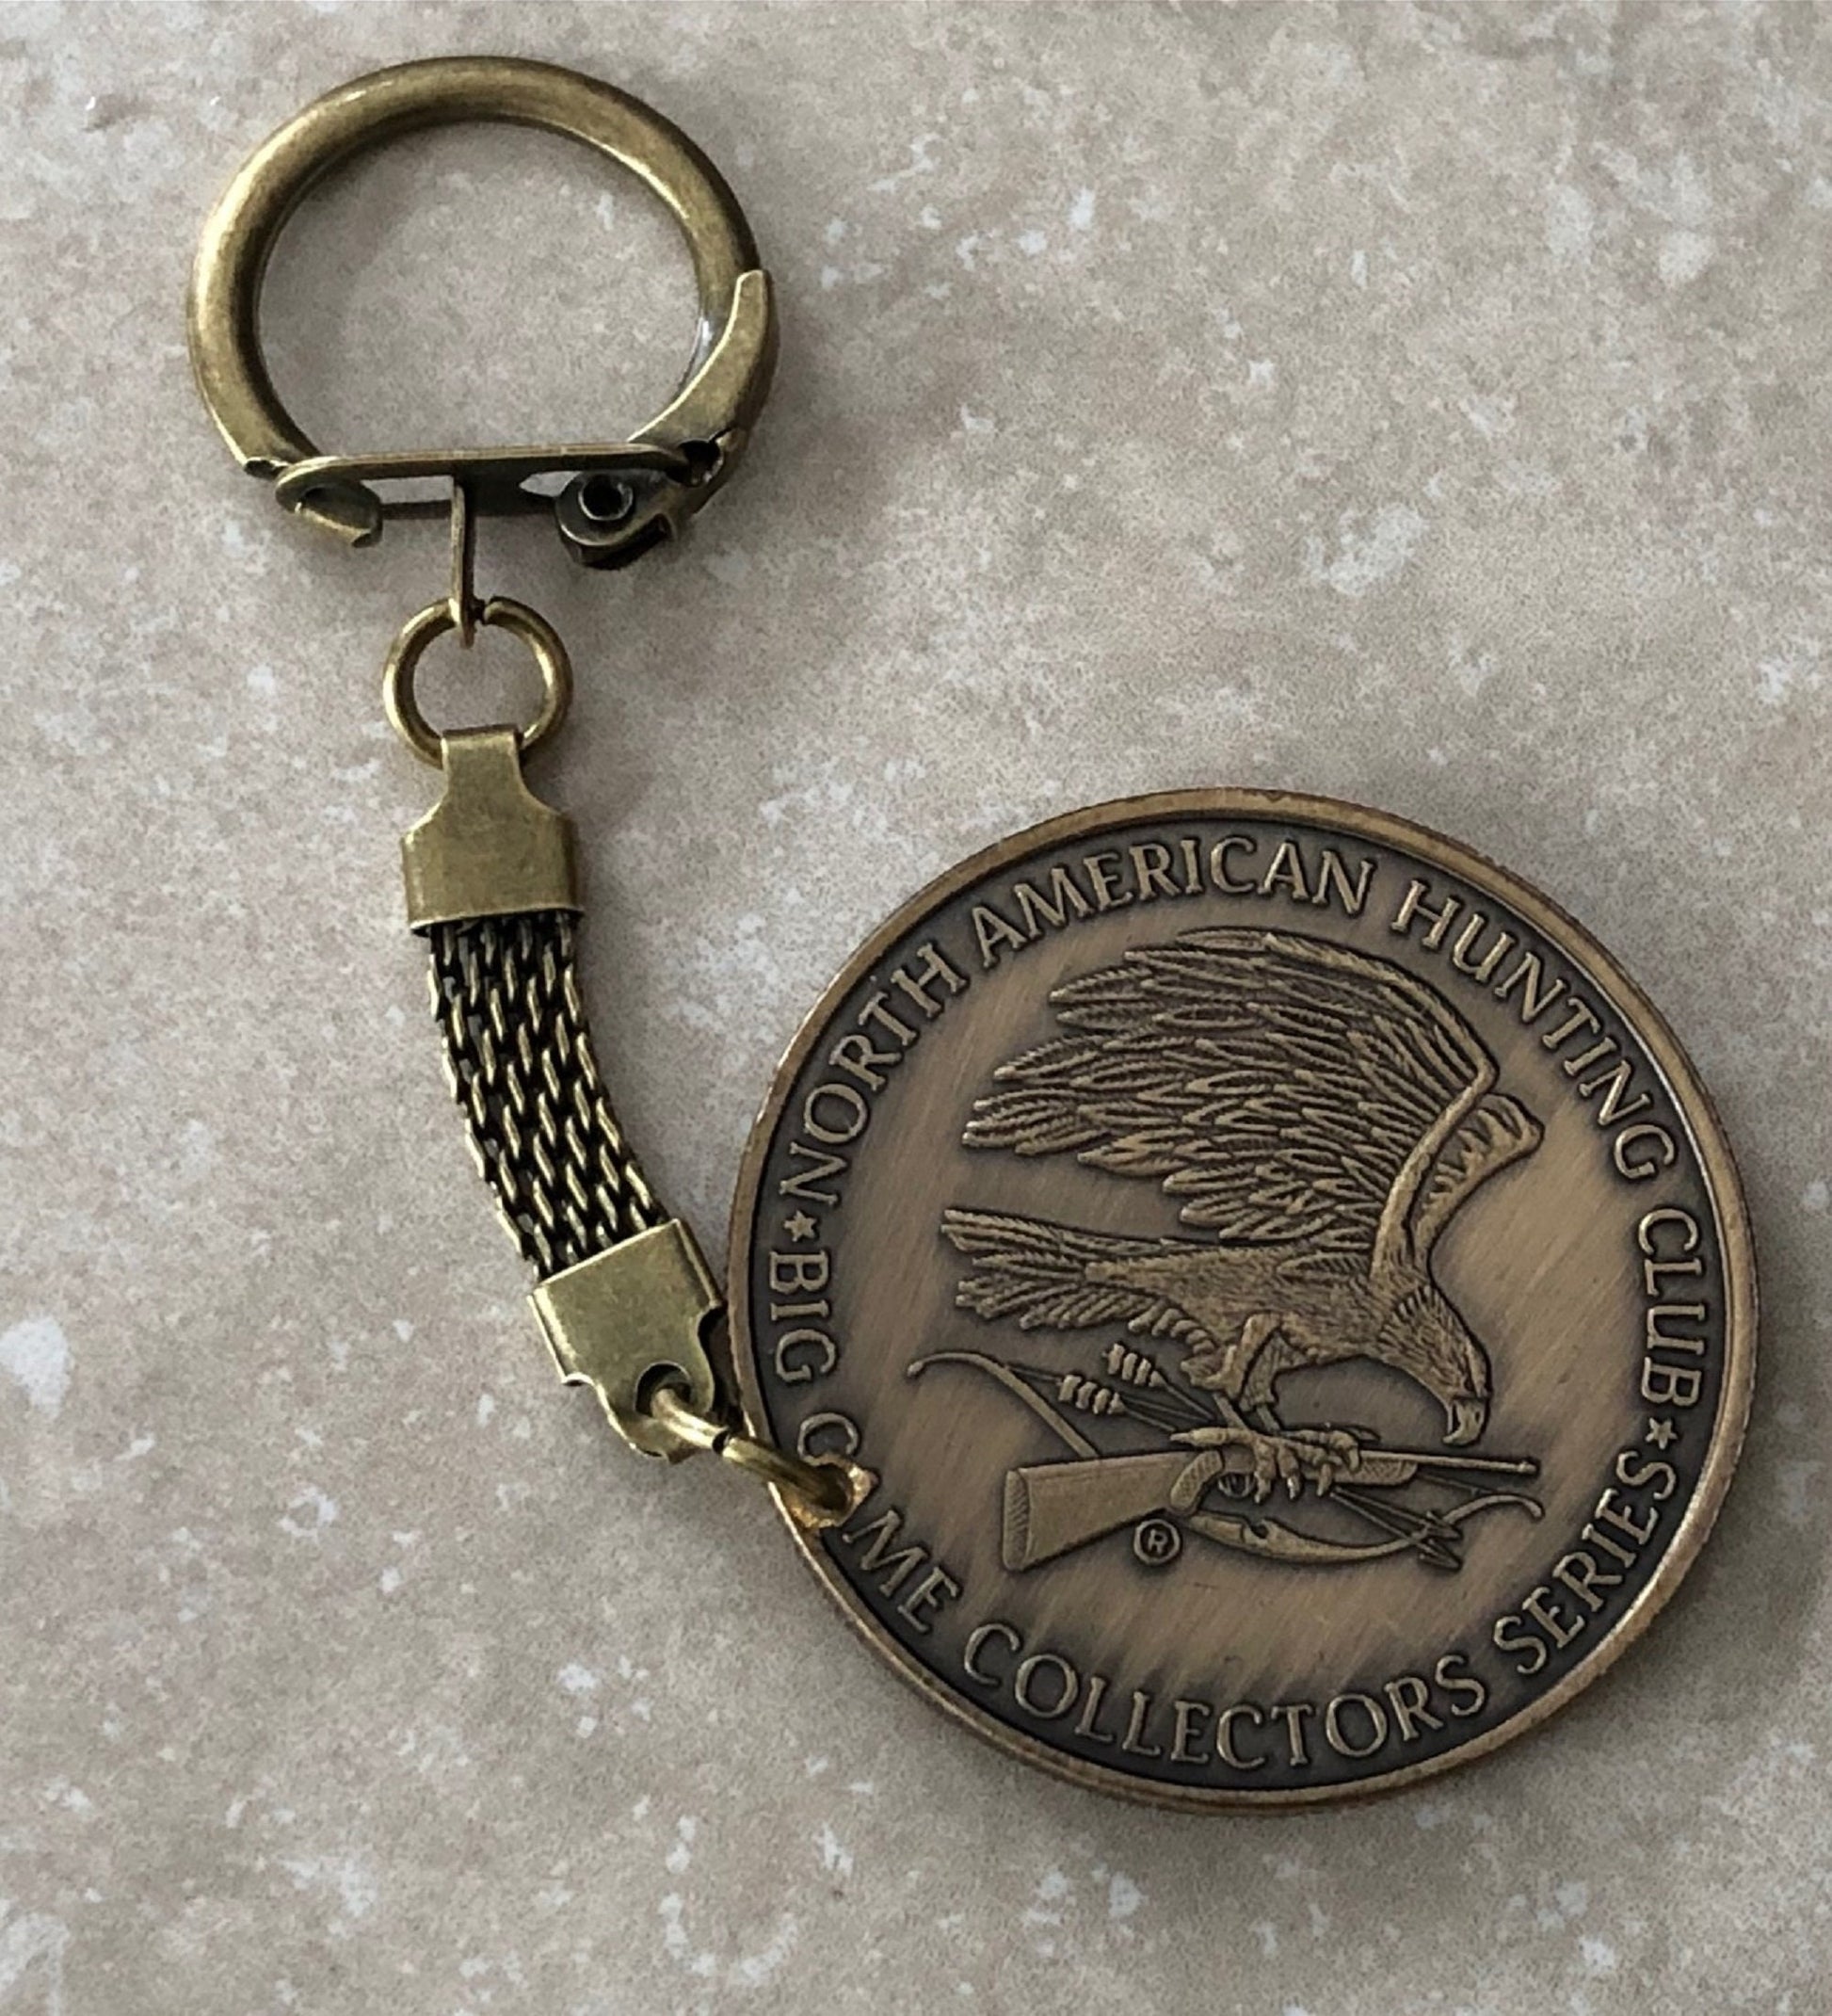 Coin Keychain North American Hunting Club NAHC Bear, Deer, Vintage One of a Kind Rare Find Vintage Handmade